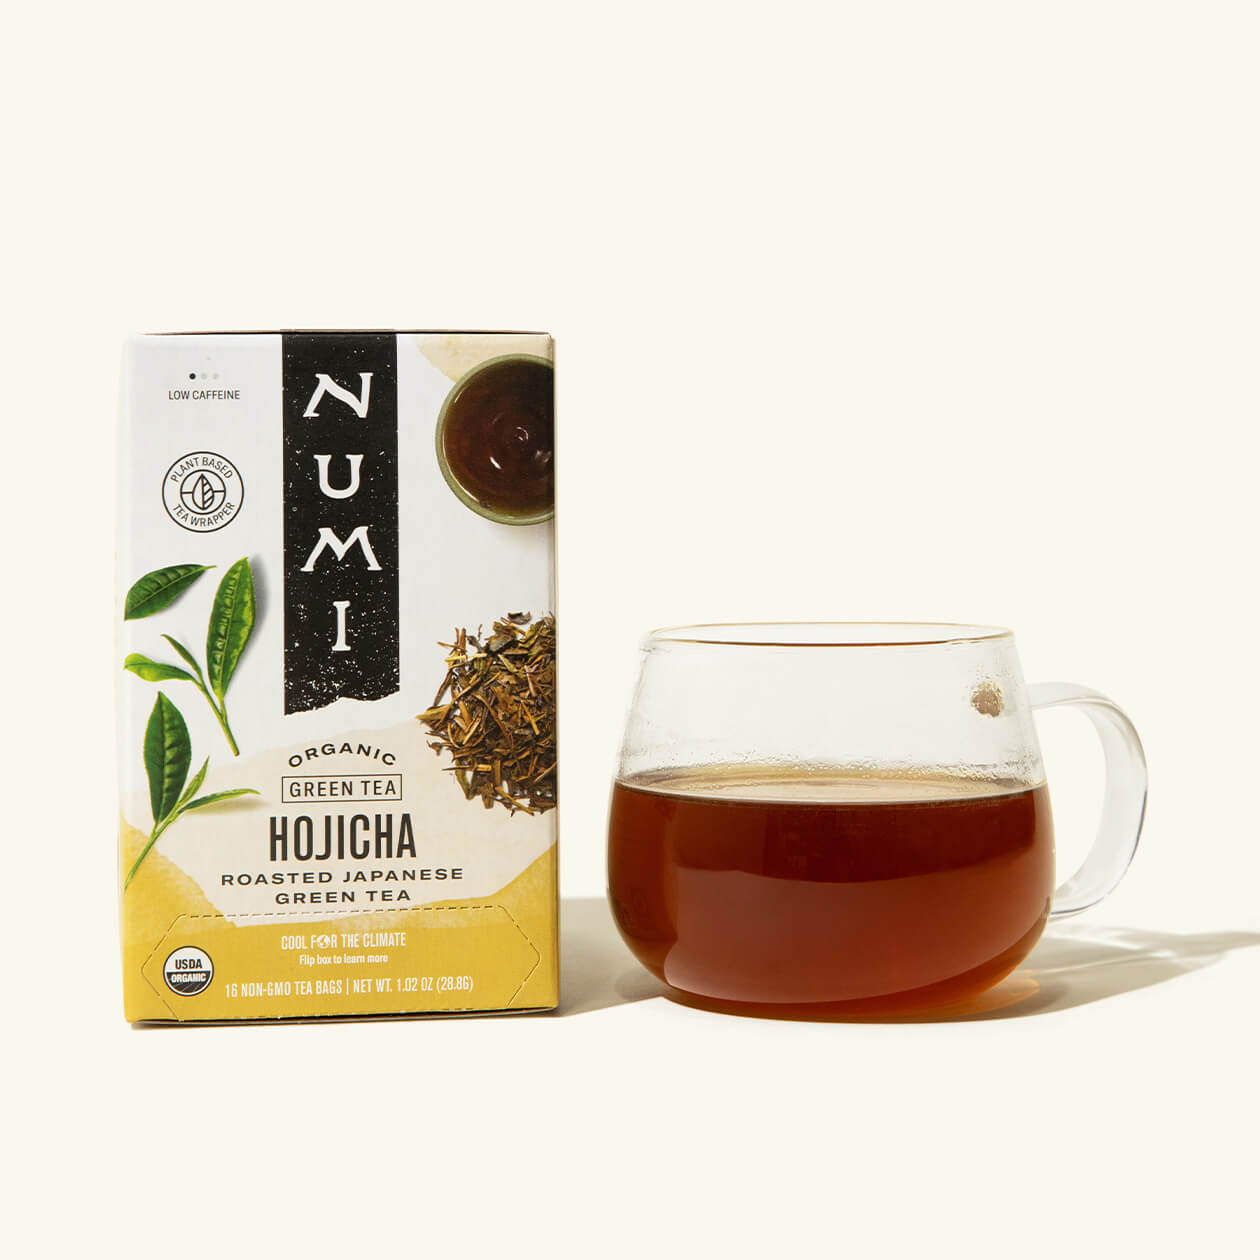 A box of Numi's Hojicha next to a brewed cup of tea in a clear cup